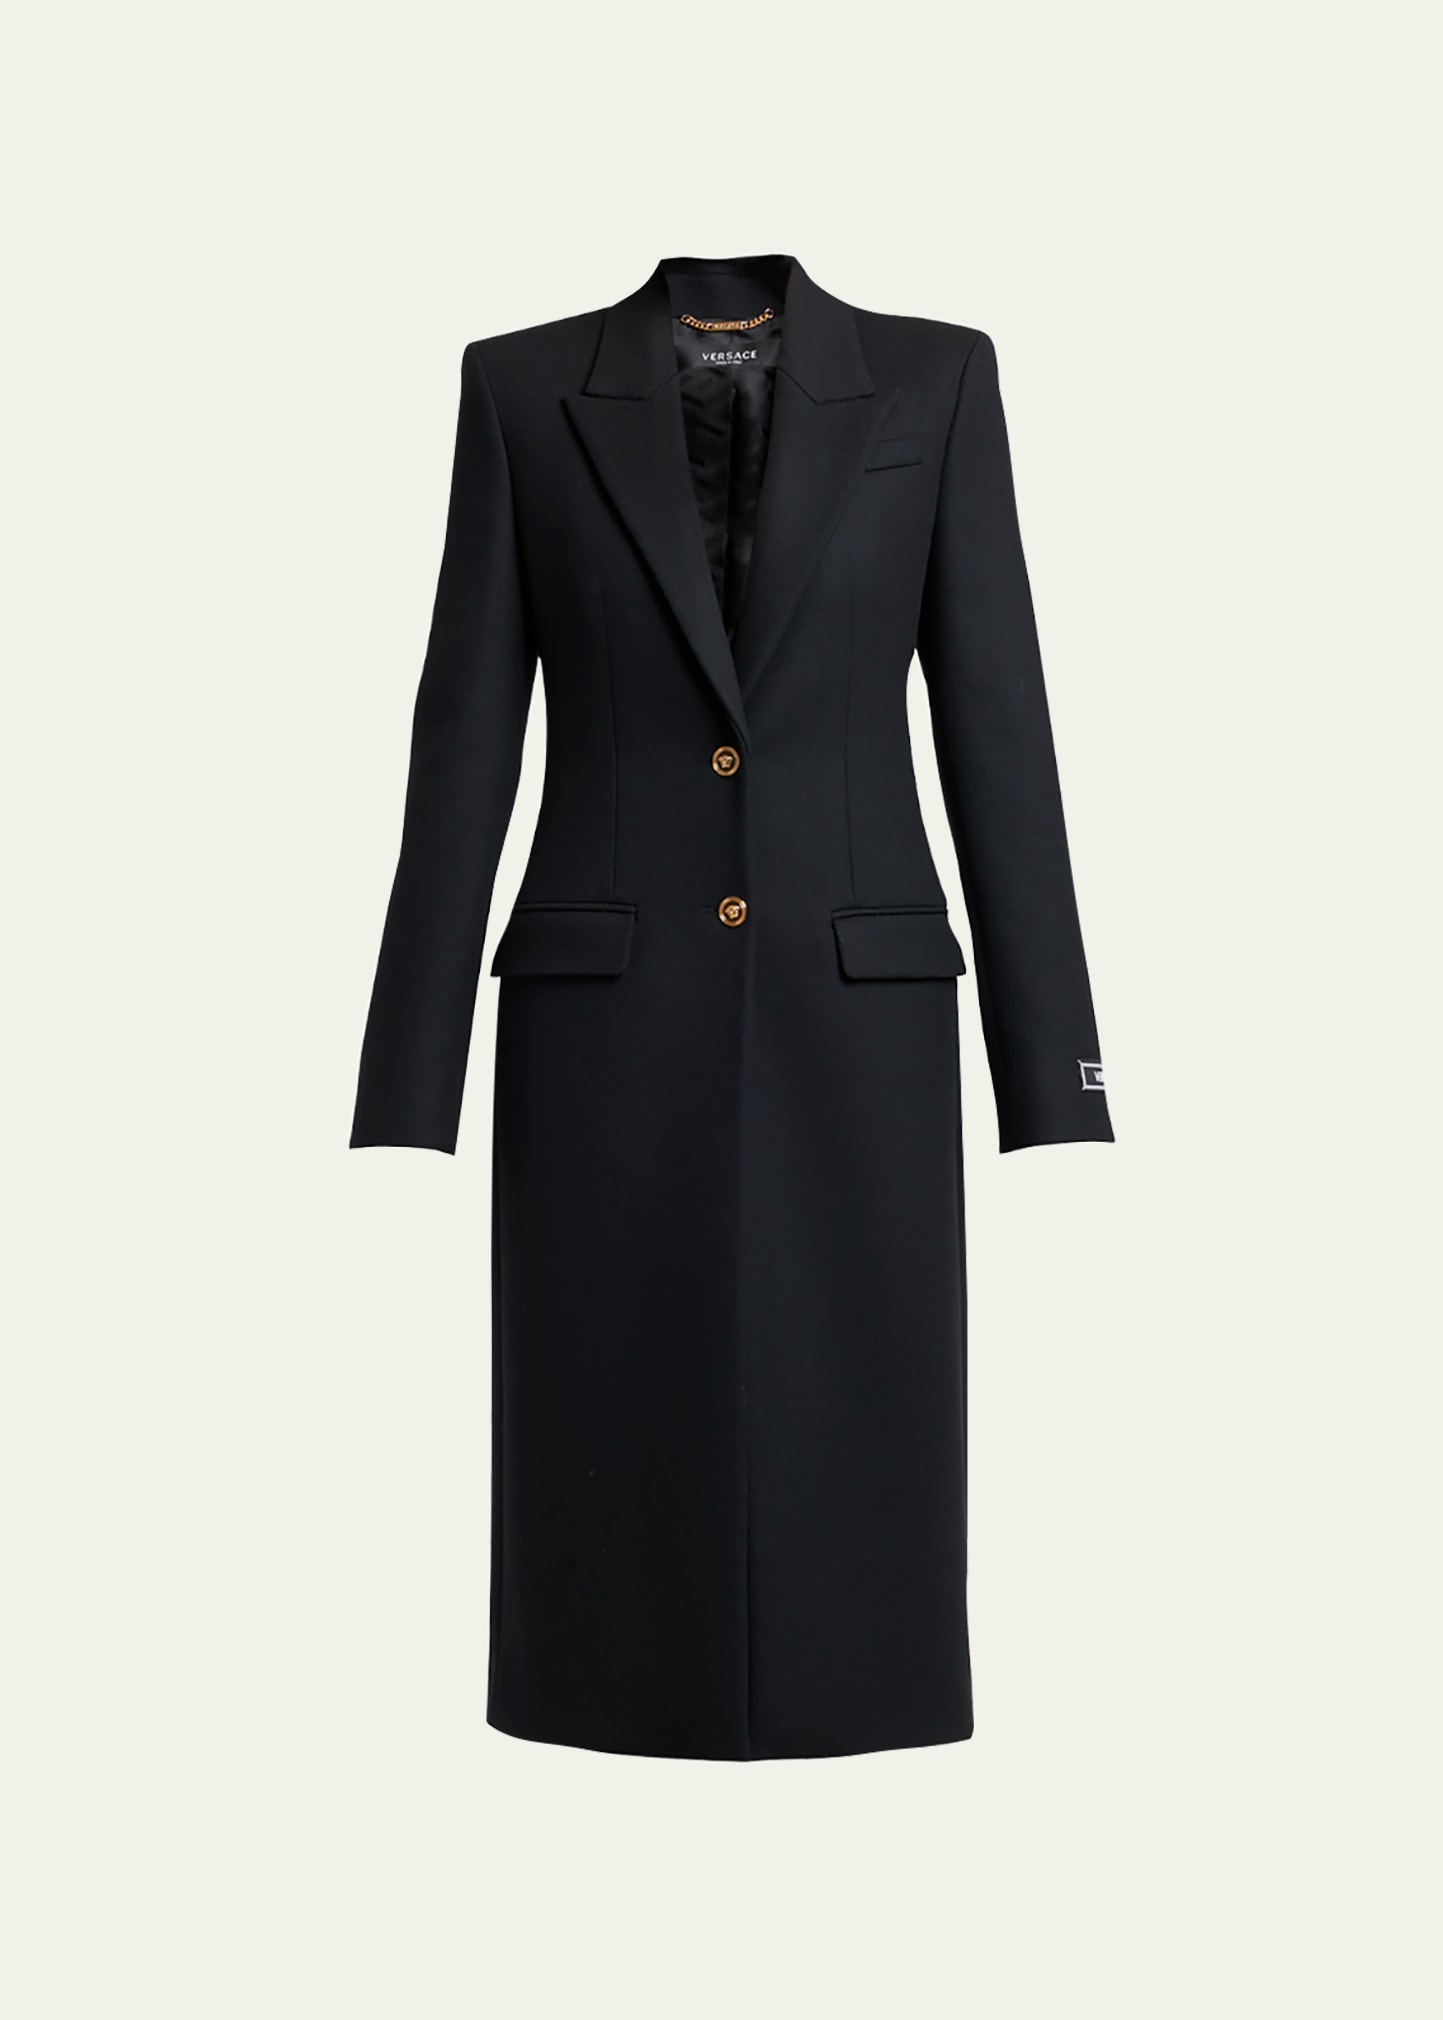 Versace Caban Cape Light-felted Wool Peacoat In Black